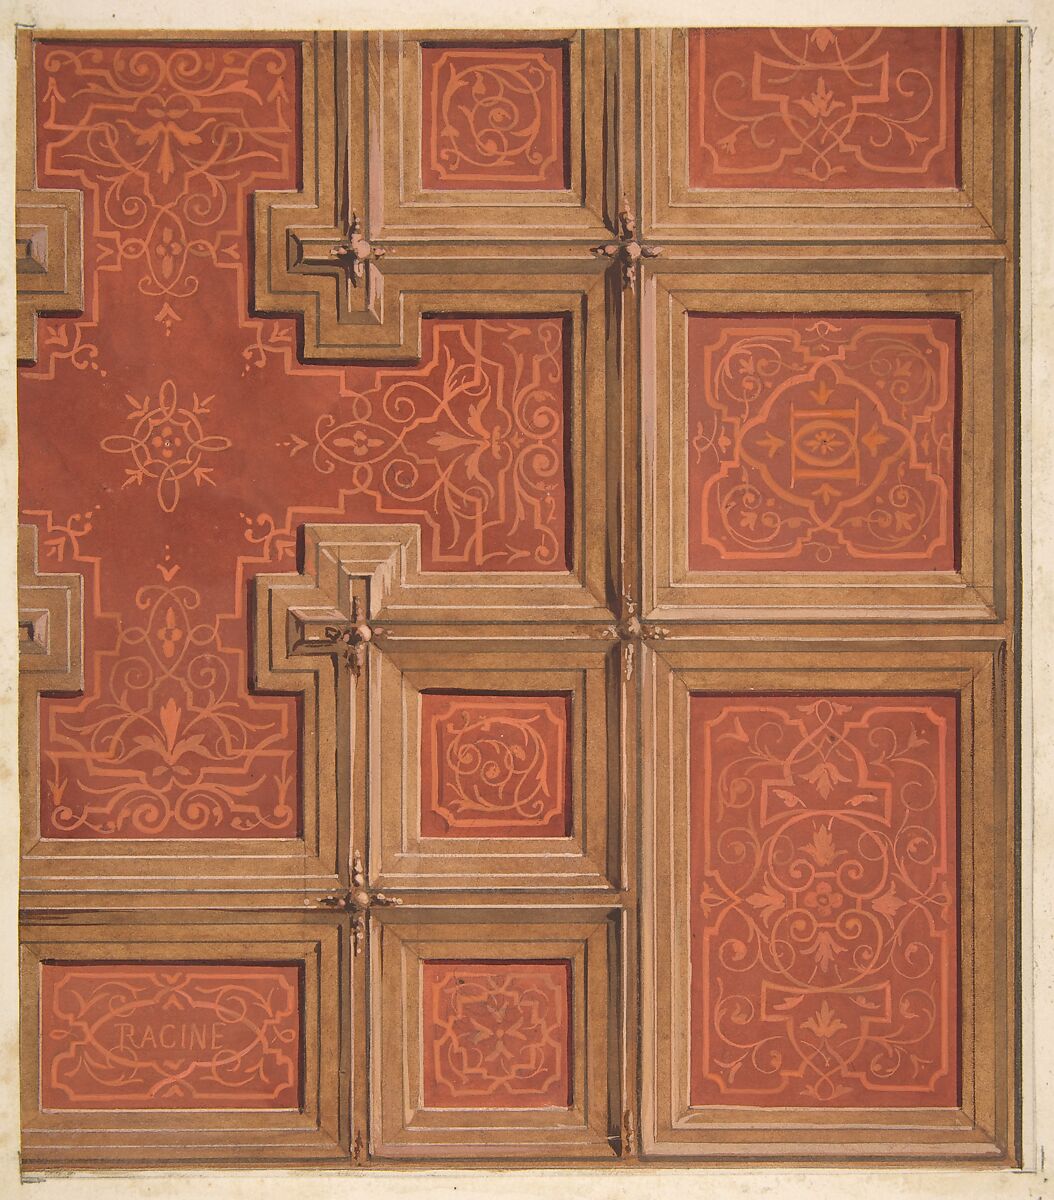 Design for the decoration of a coffered ceiling ornamented with the name "Racine" and entwined  letters: DD, Jules-Edmond-Charles Lachaise (French, died 1897), Graphite, watercolor and gouache on wove paper 